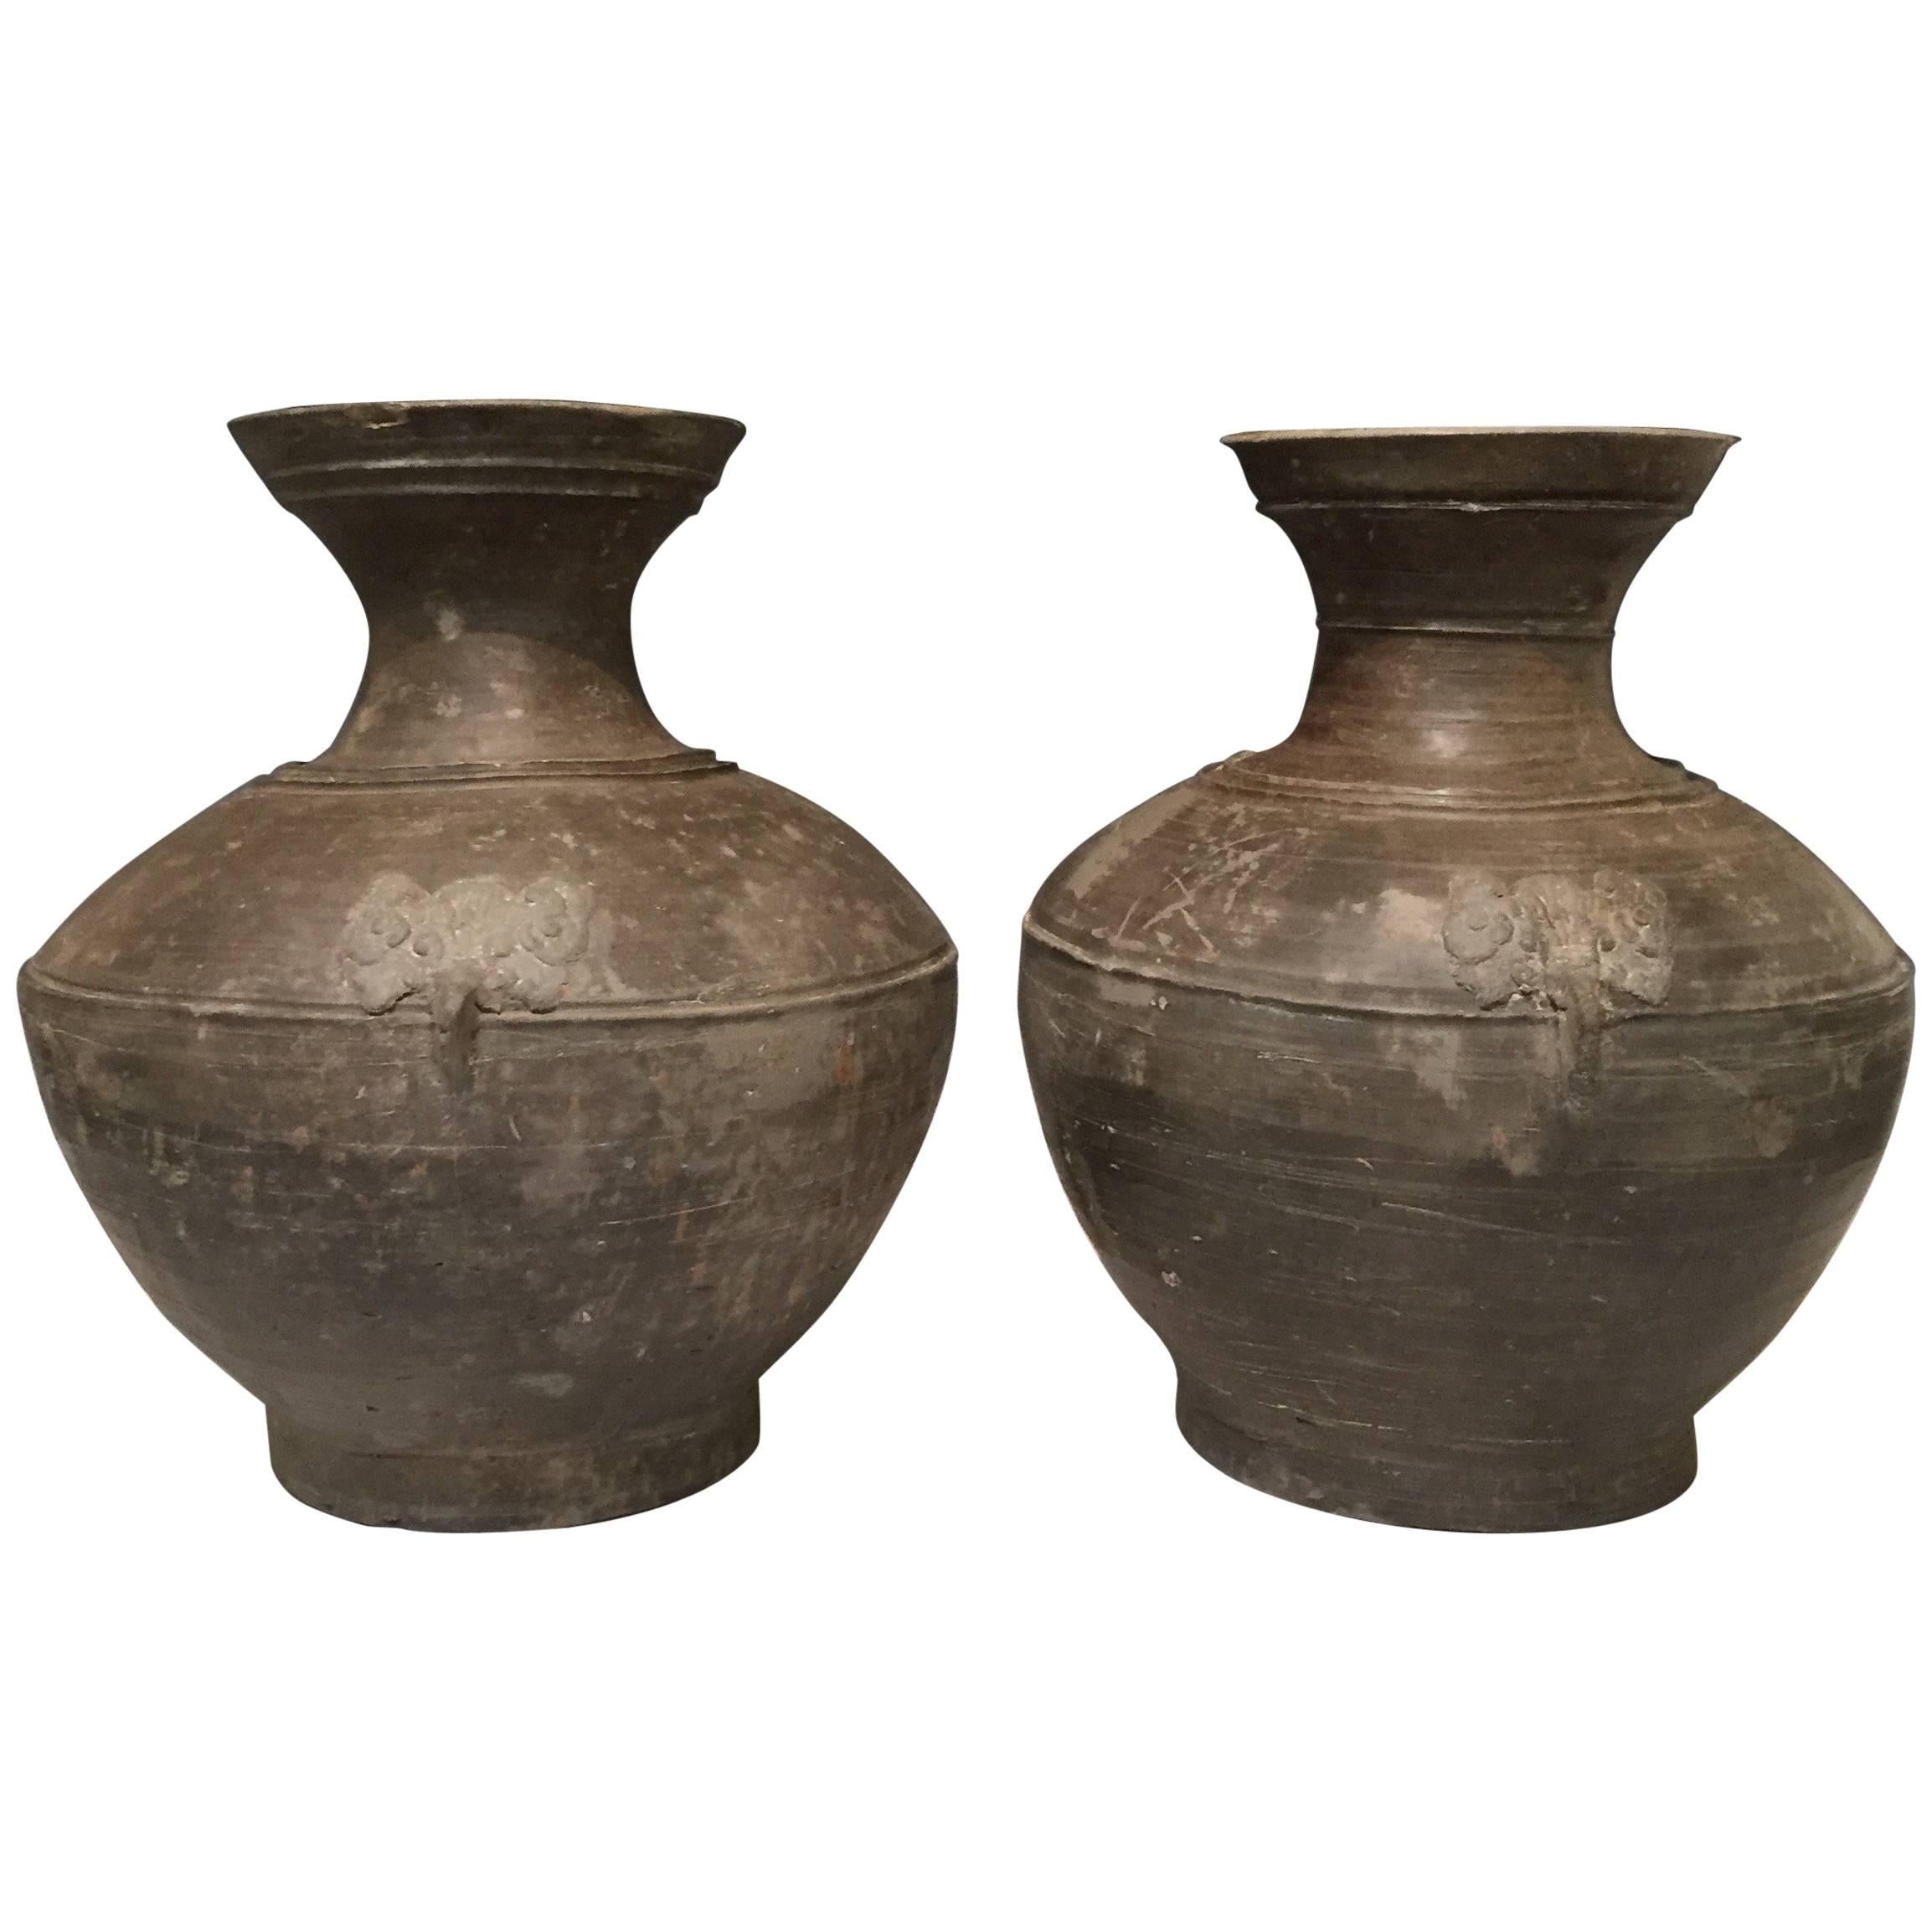 Pair of Antique Pottery Jars From The Han Dynasty